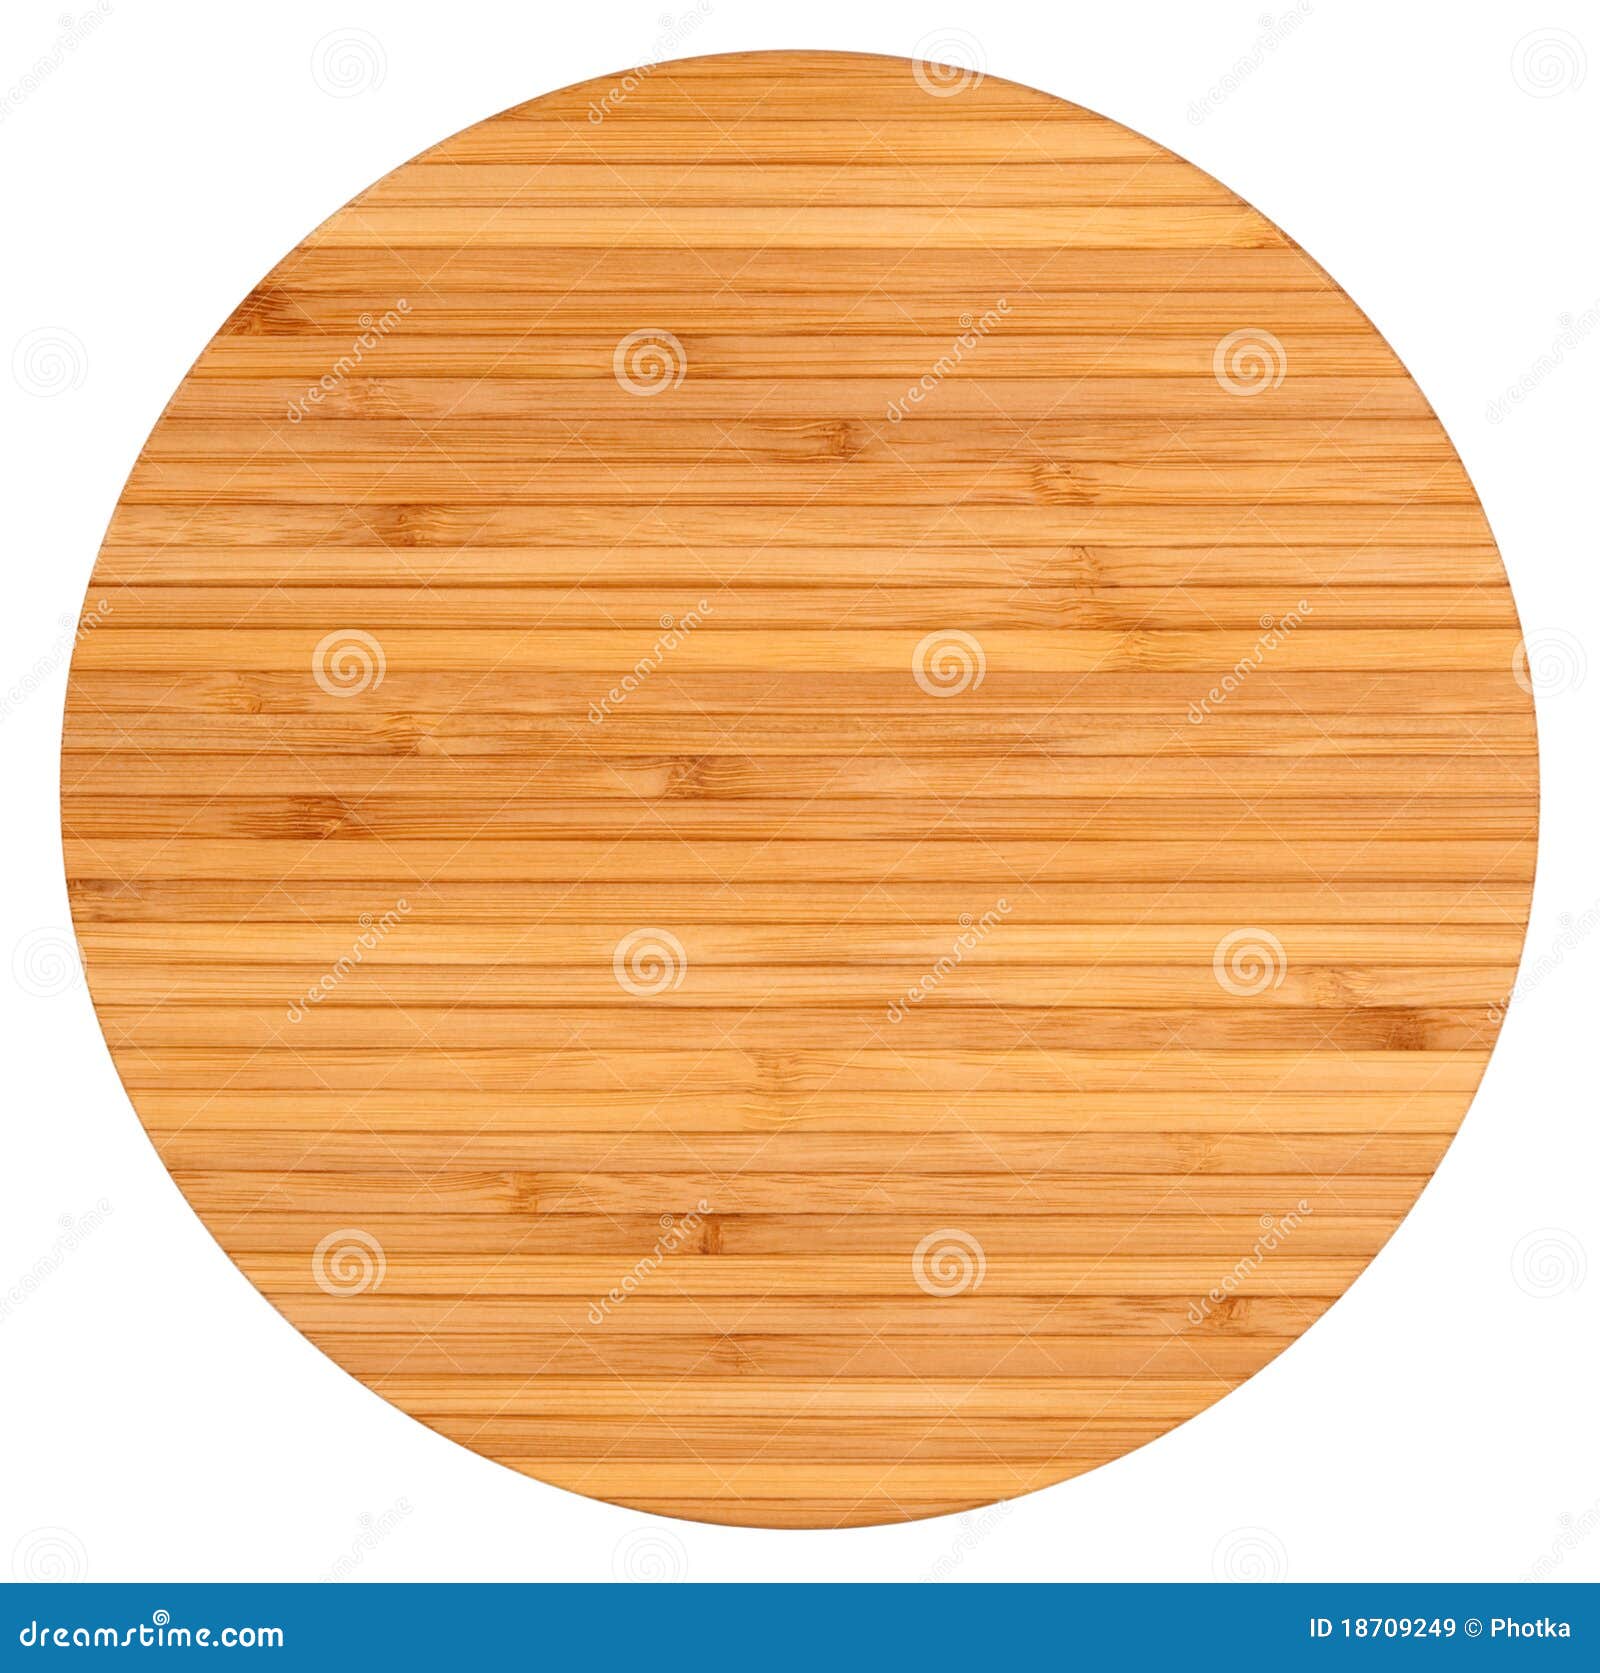 Round wooden board stock image. Image of blank, brown - 18709249